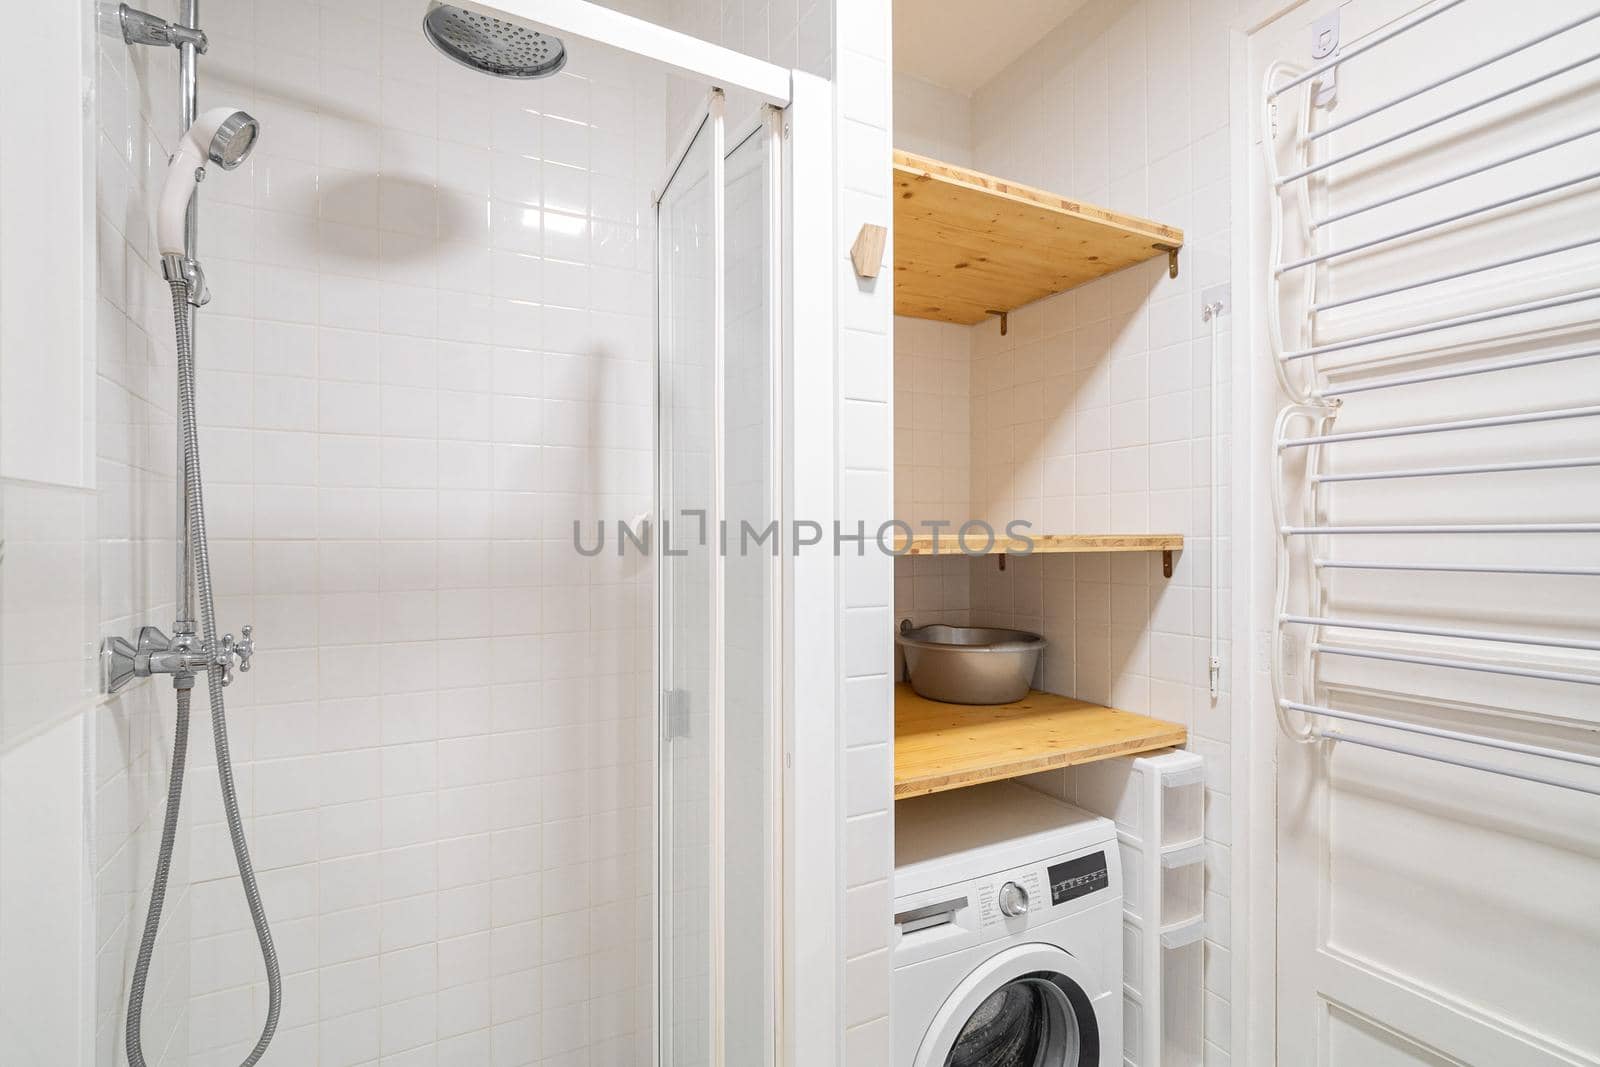 Small bathroom interior with shower and washing machine.